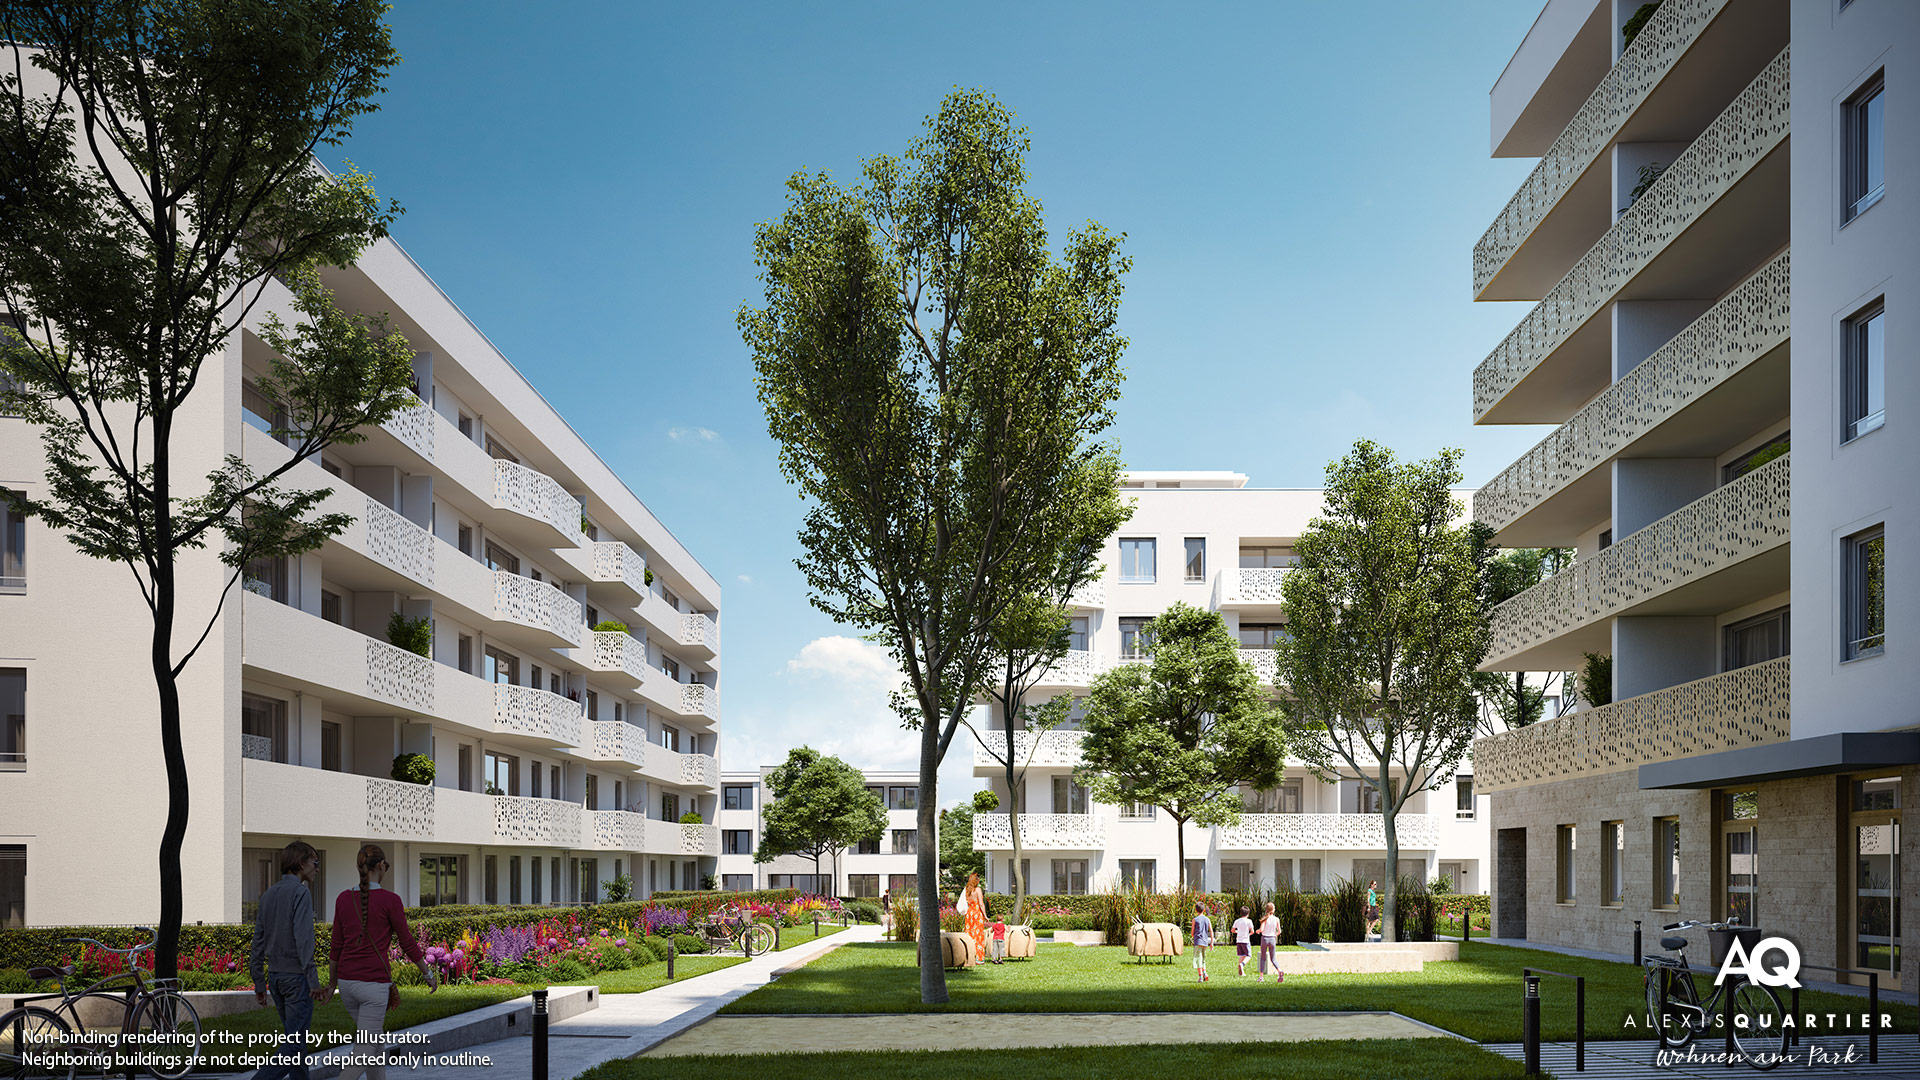 ALEXISQUARTIER in Munich-Perlach: Sales officially start today!